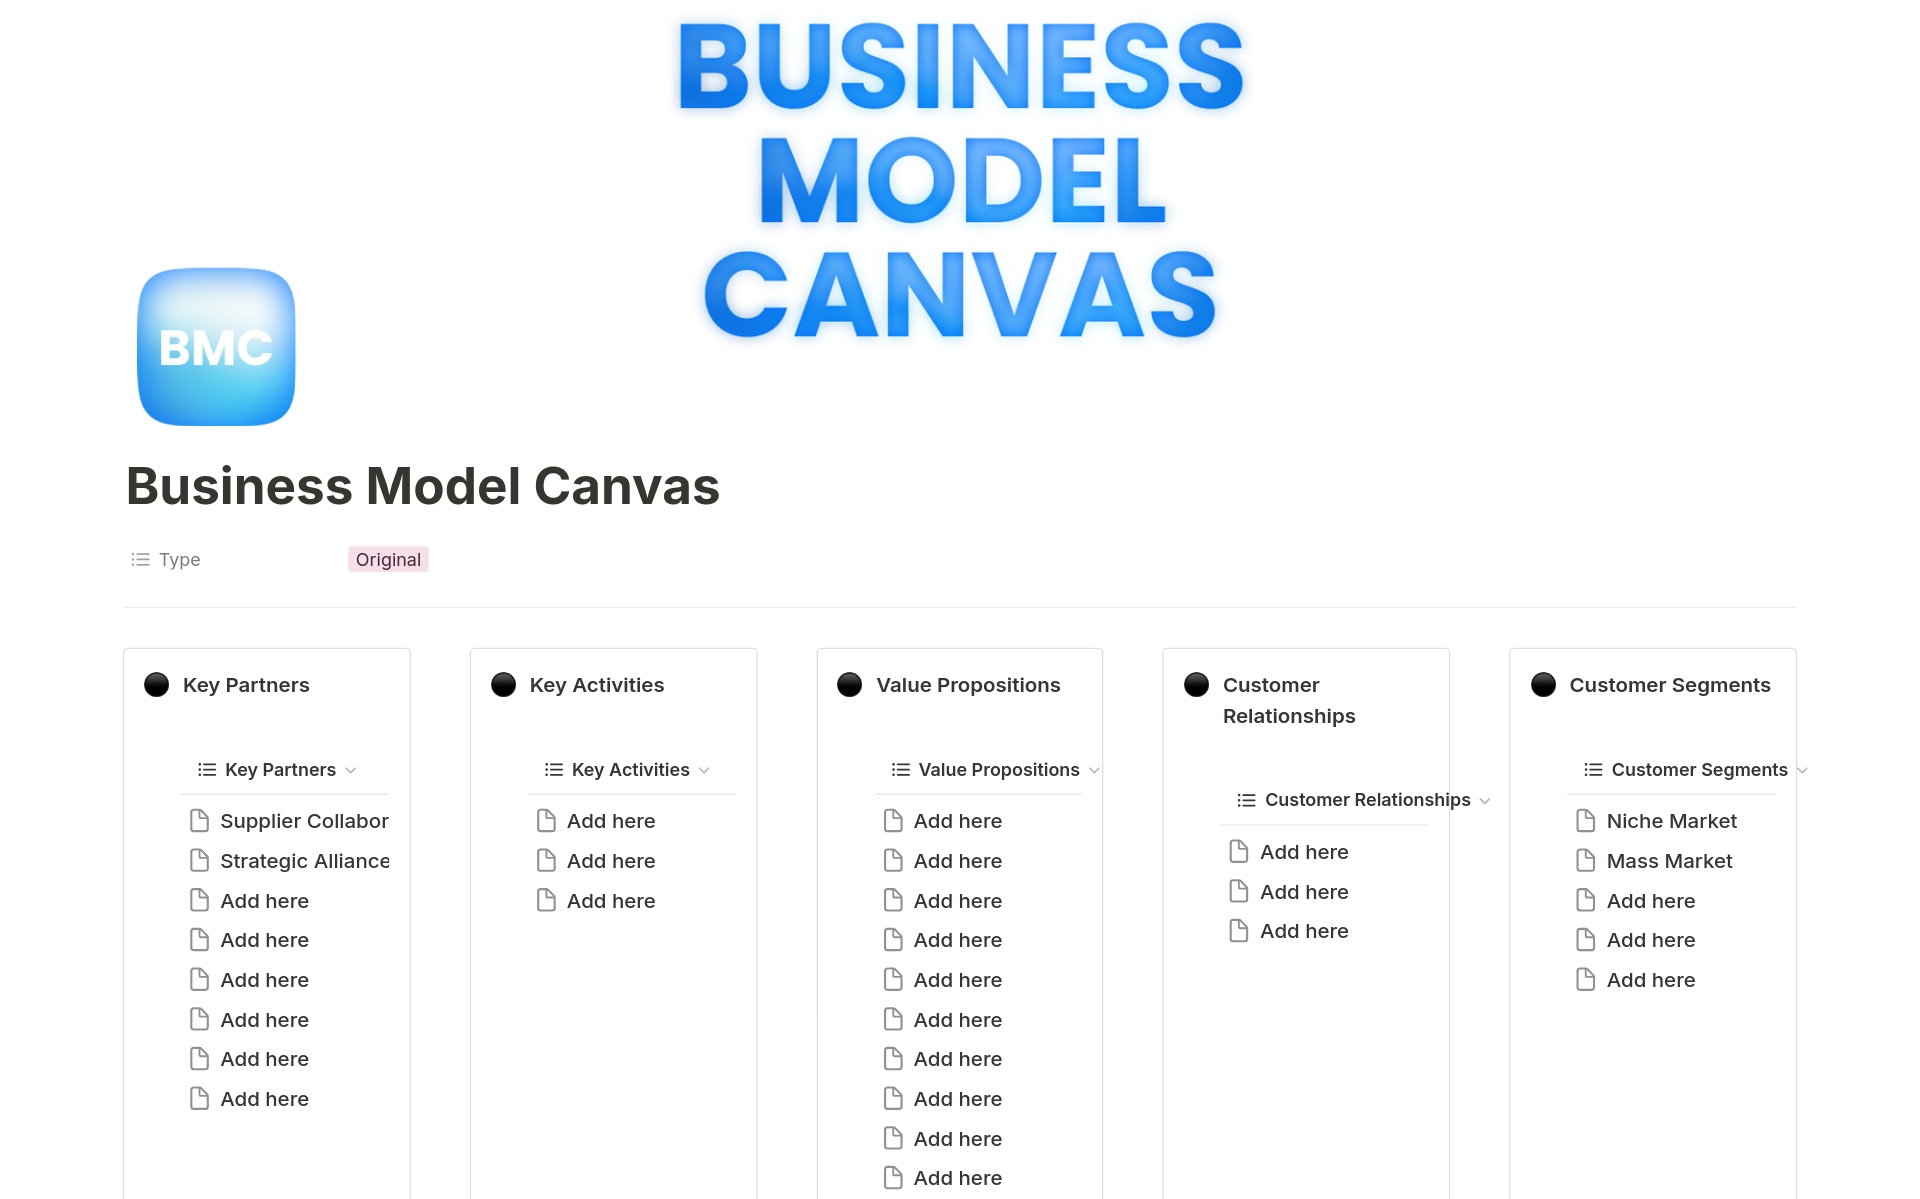 The Business Model Canvas for Notion splits a business model into 9 areas and invites you to brainstorm how your business will capitalize on each.